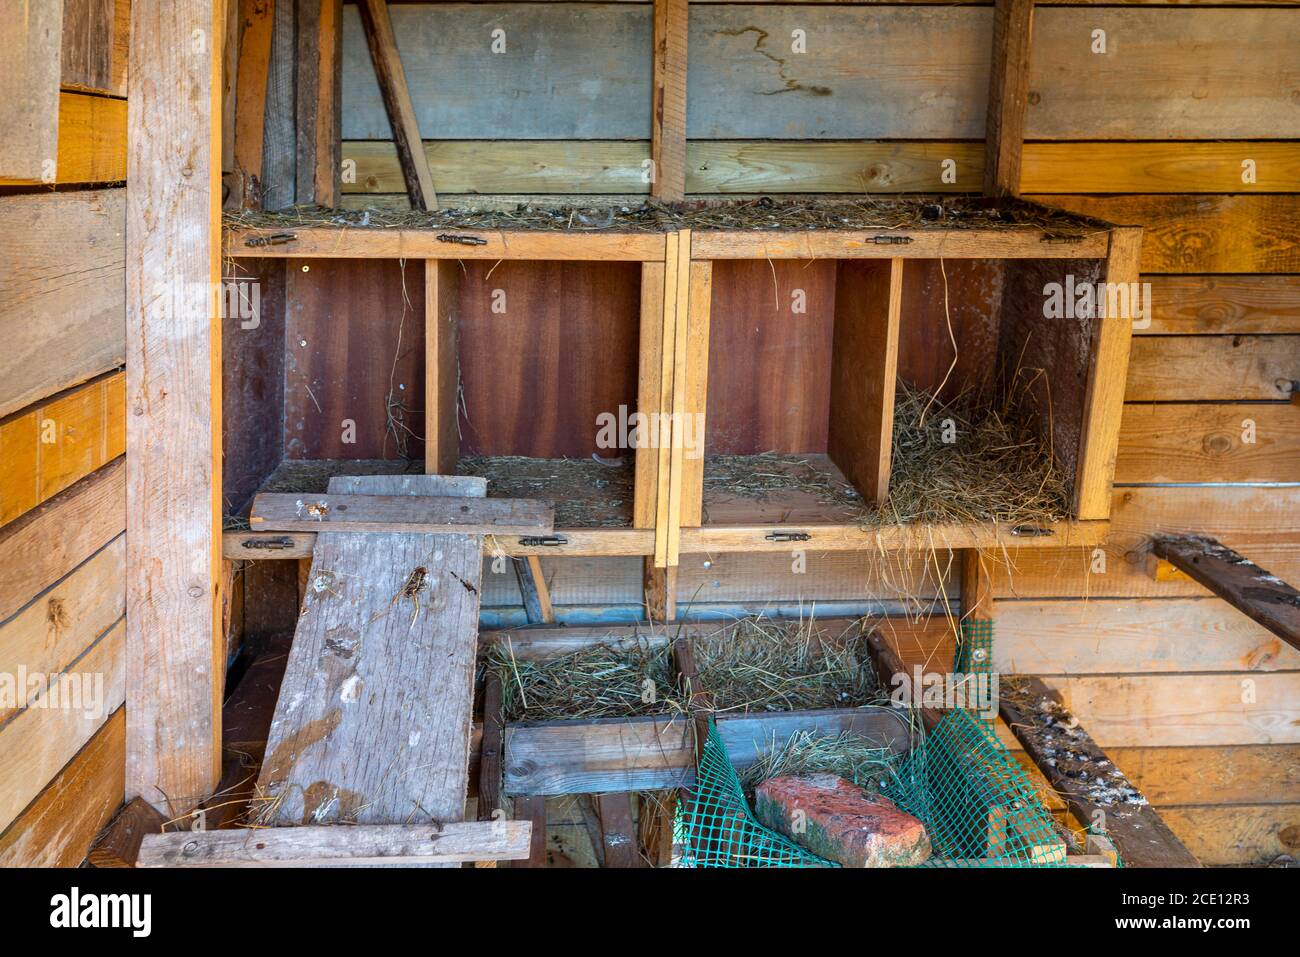 The interior of a wooden henhouse in the countryside, visible pens and a wooden ramp. Stock Photo